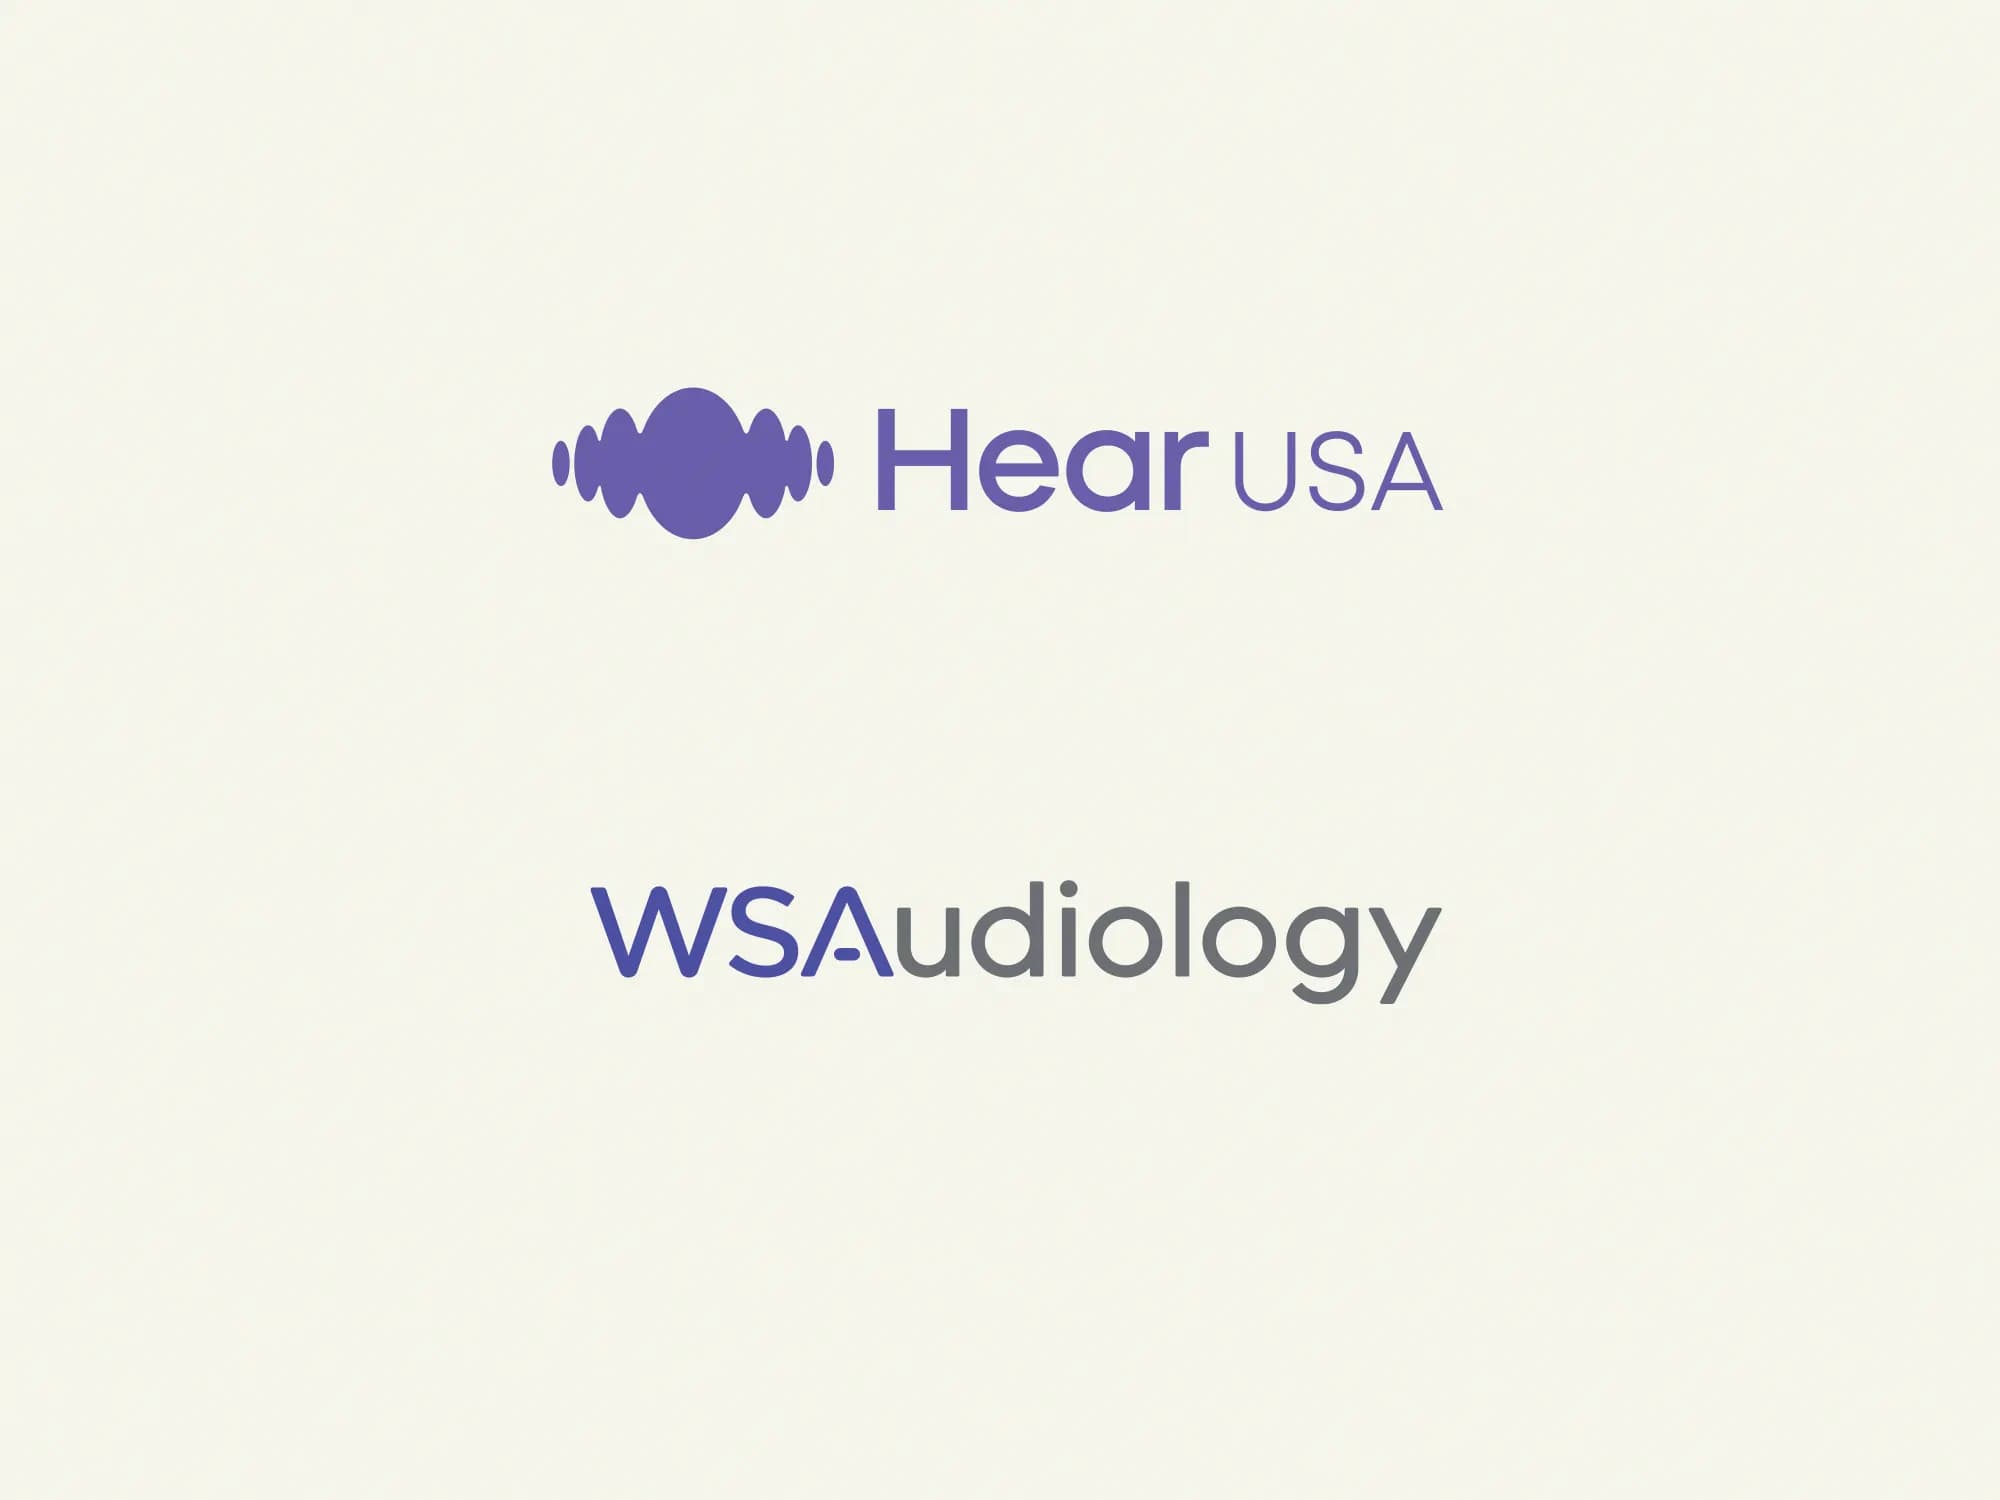 HearUSA and WS Audiology logo for hearing aids